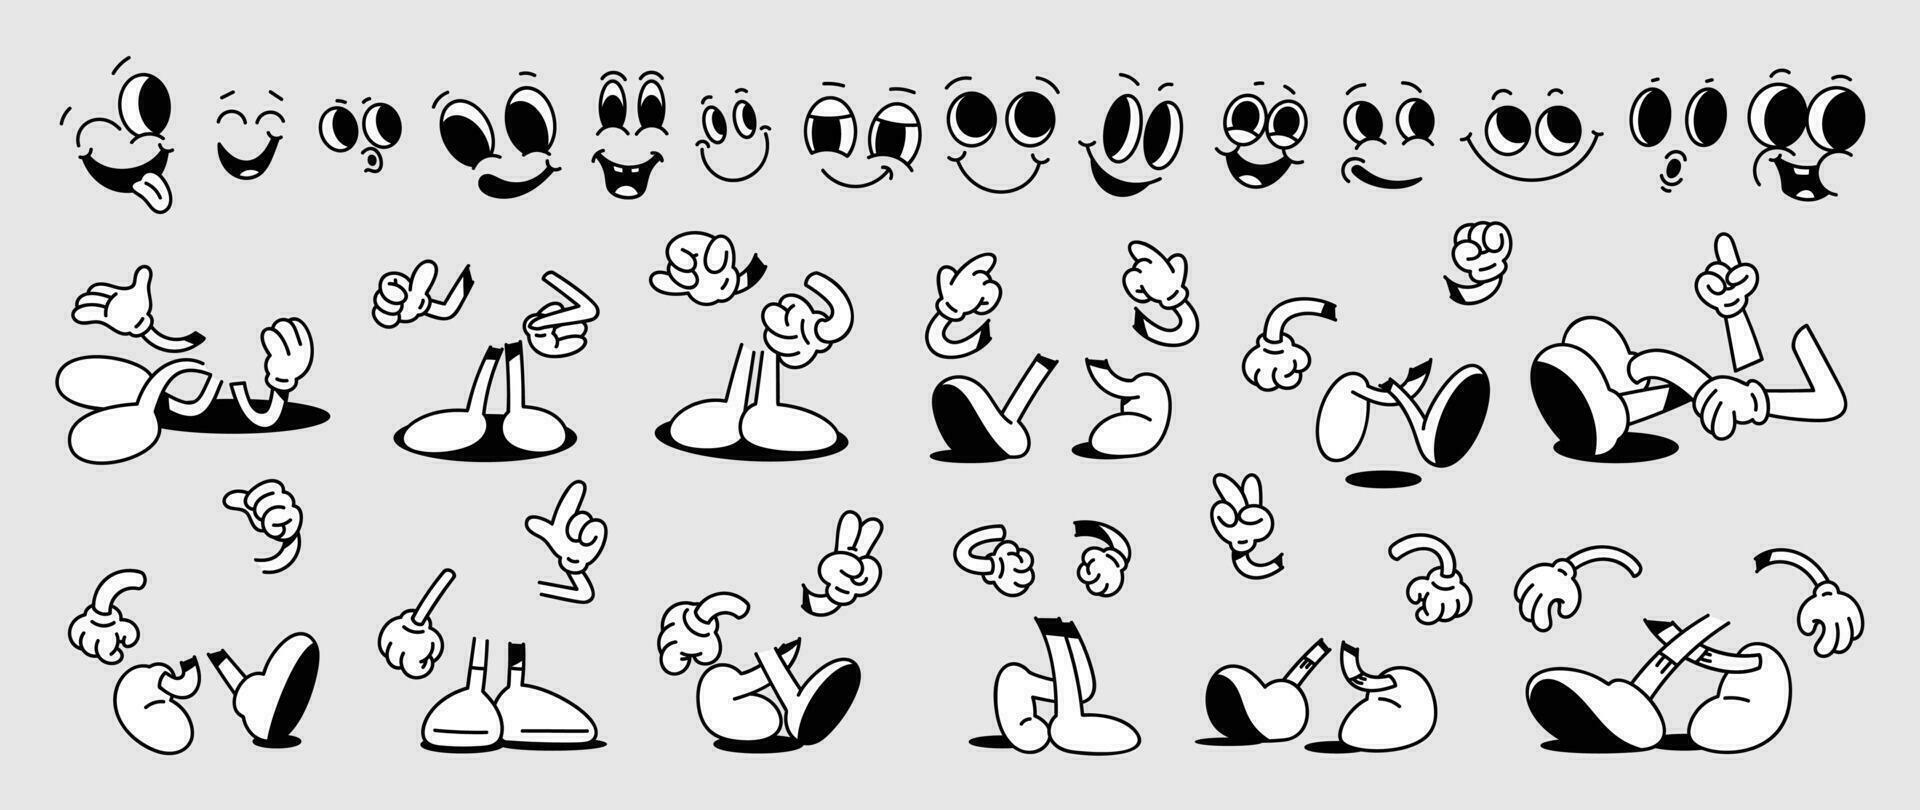 Set of 70s groovy comic faces vector. Collection of cartoon character faces, leg, hand in different emotions happy, angry, sad, cheerful. Cute retro groovy hippie illustration for decorative, sticker. vector